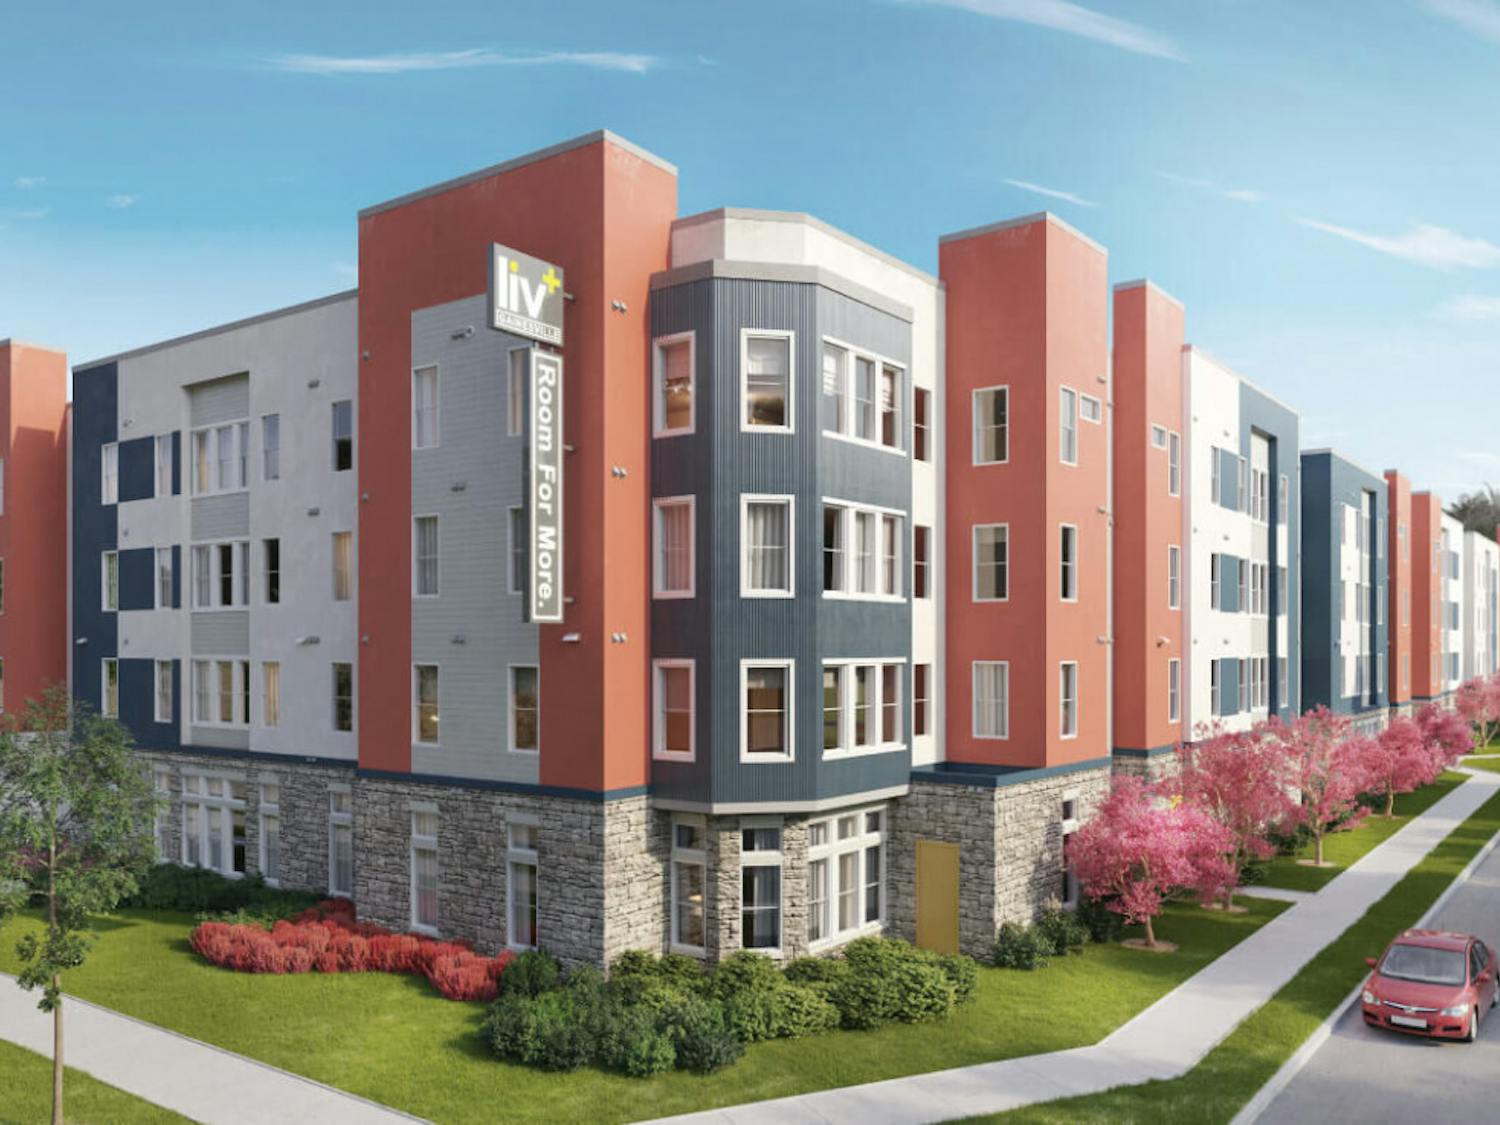 Liv+ Gainesville, a new apartment complex located on SW 13th Street, previously had its move in delayed, which affected hundreds of incoming residents.